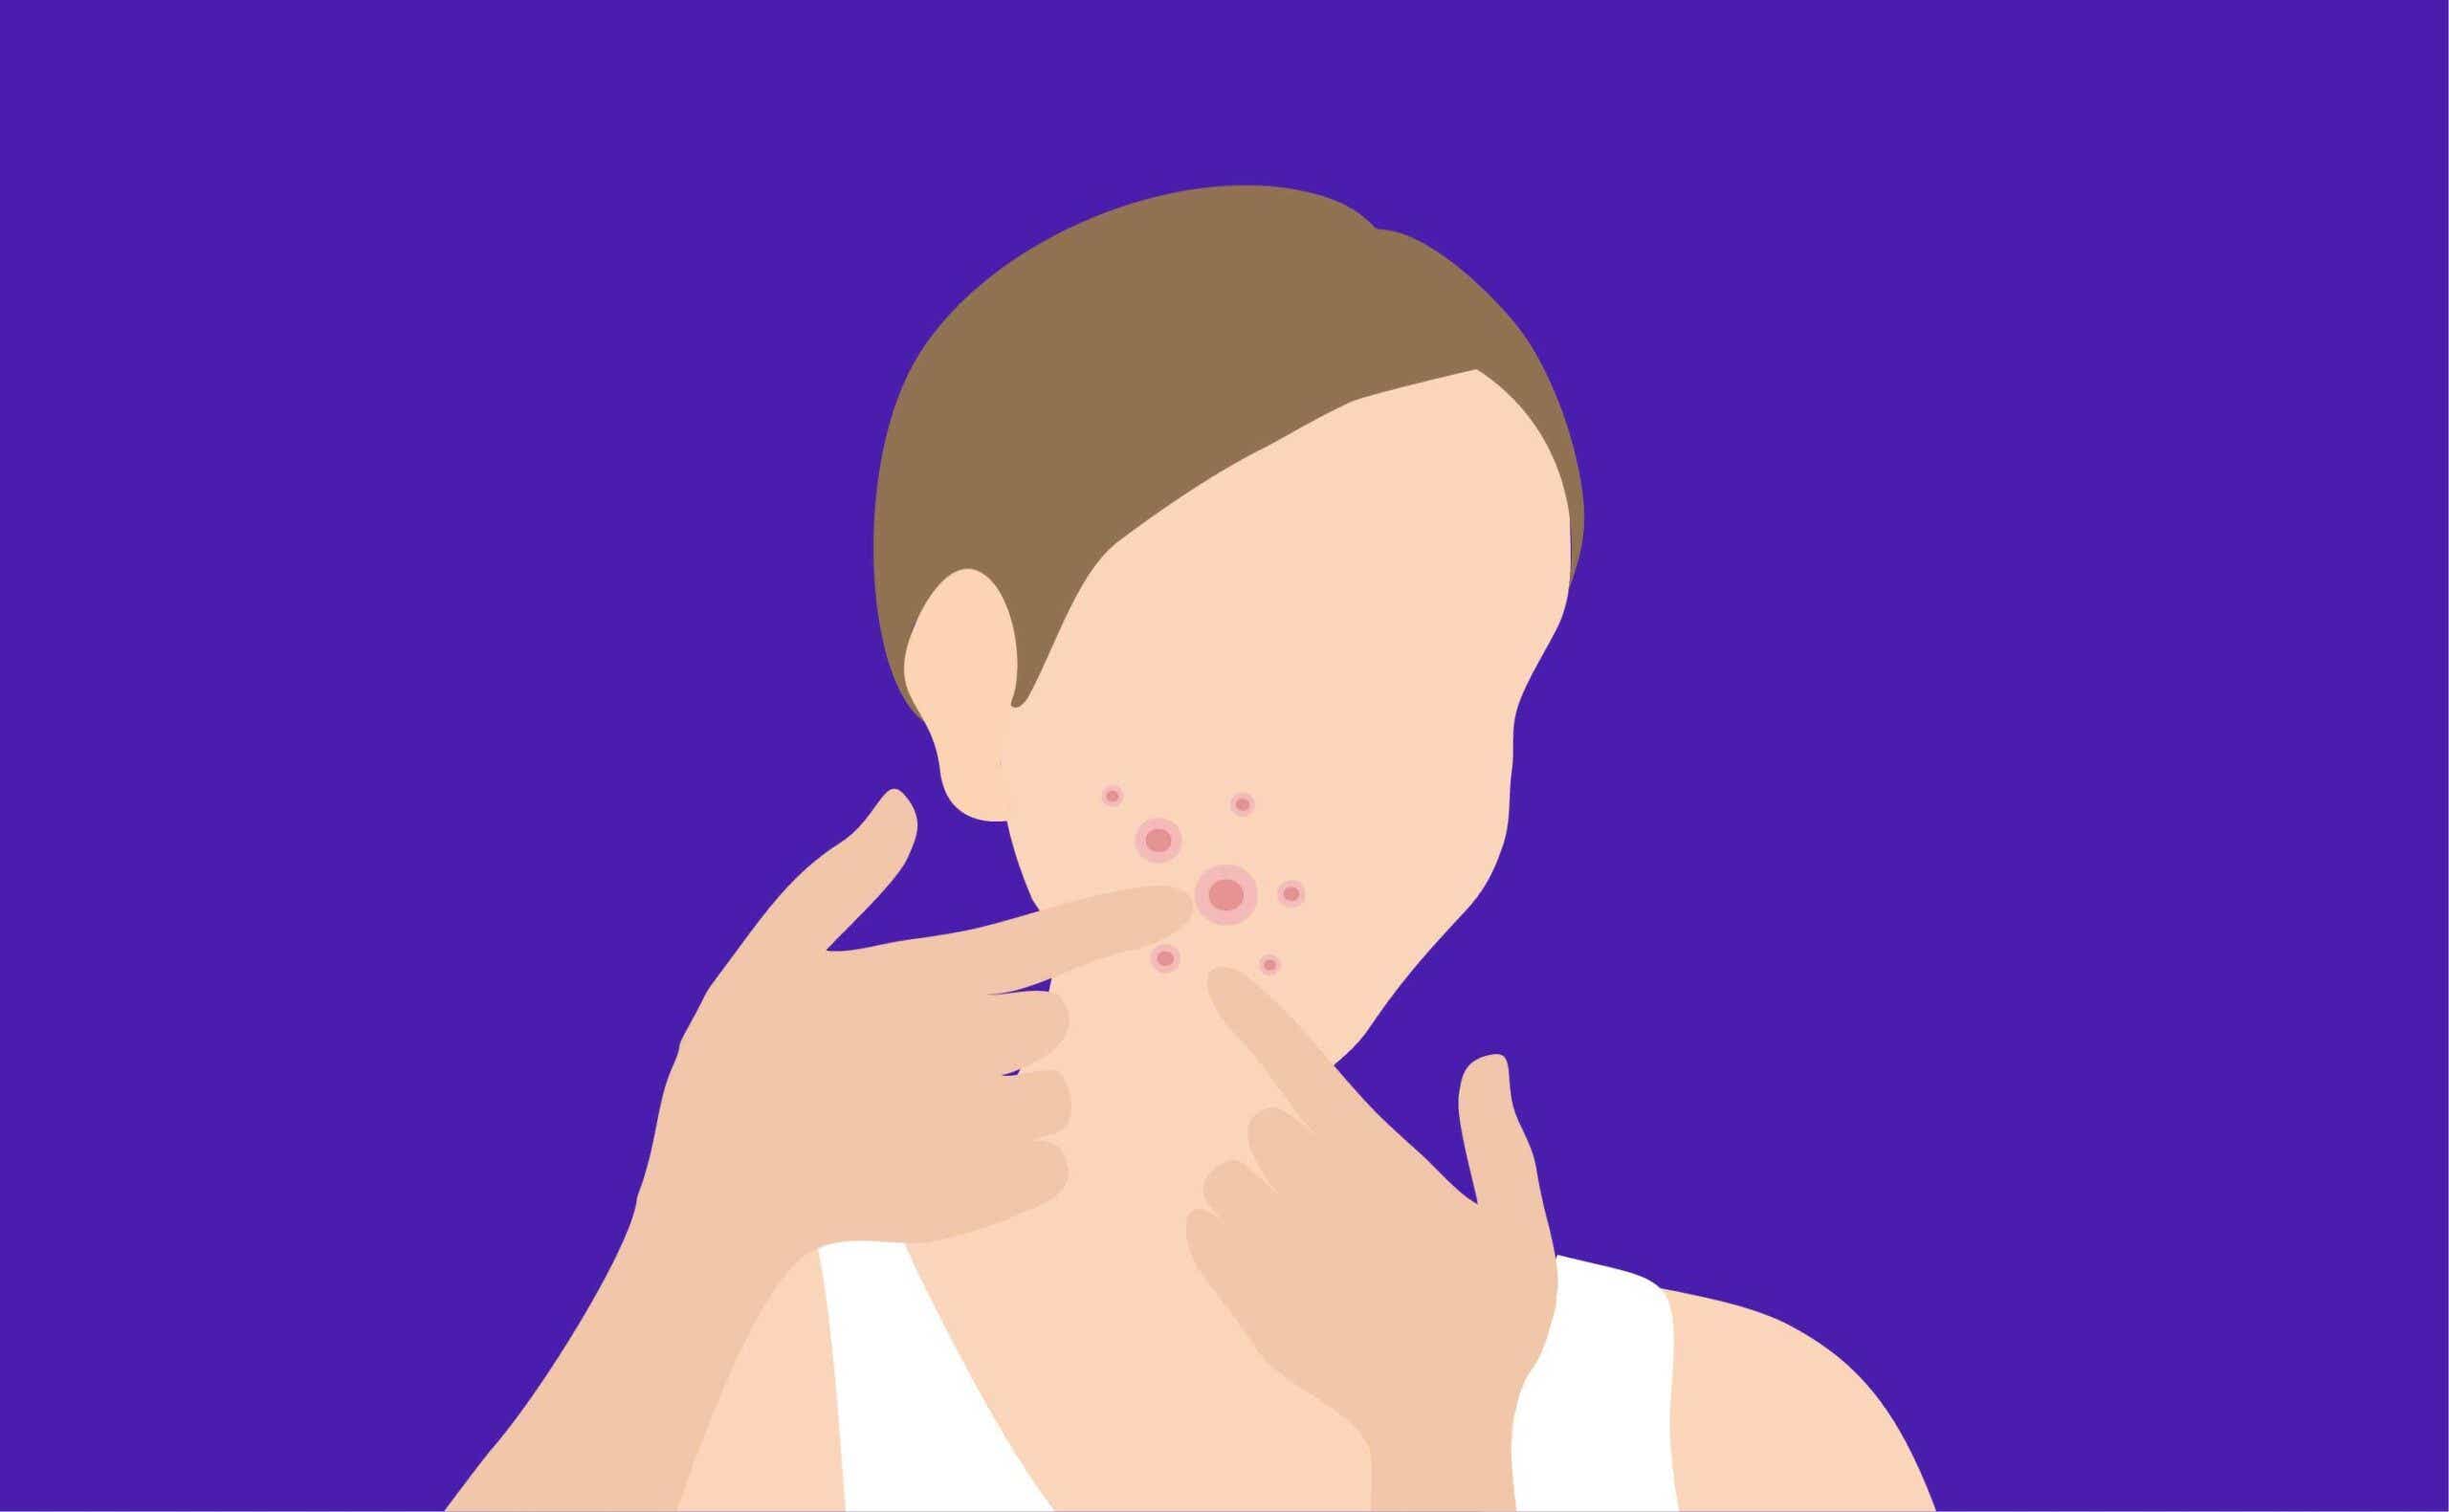 illustration of a woman touching pimples on her chin